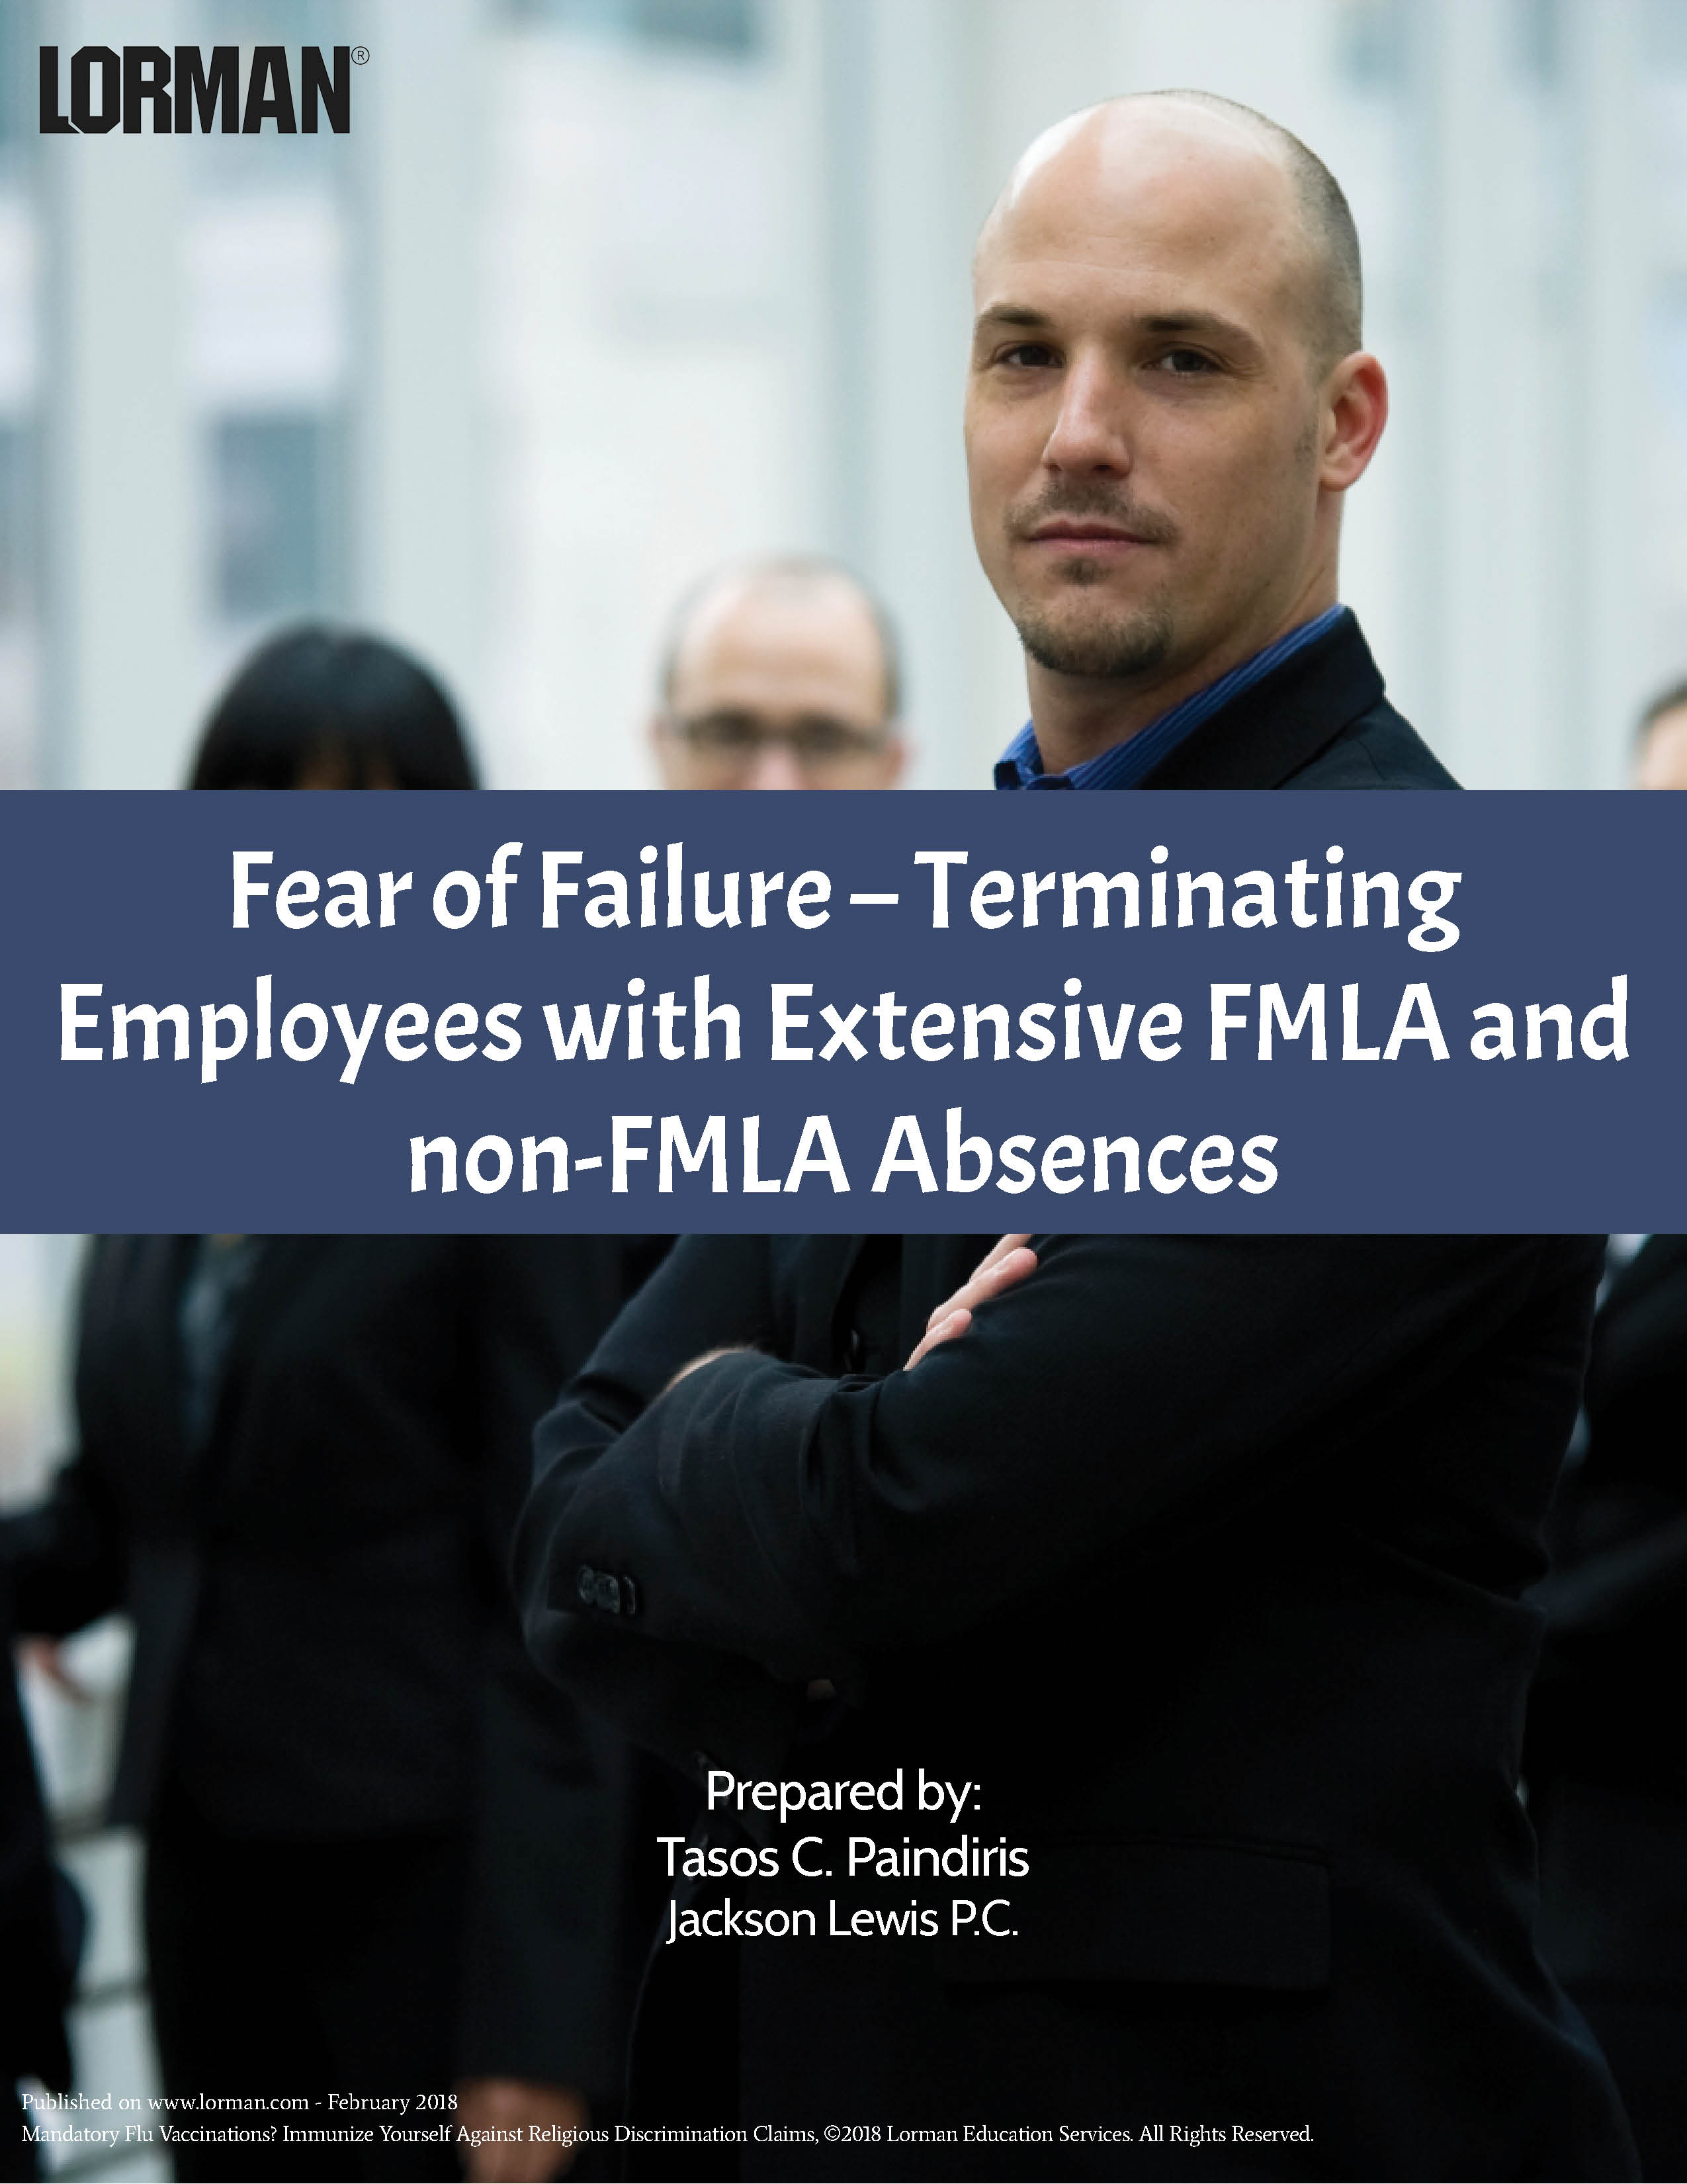 Fear of Failure - Terminating Employees with Extensive FMLA and non-FMLA Absences